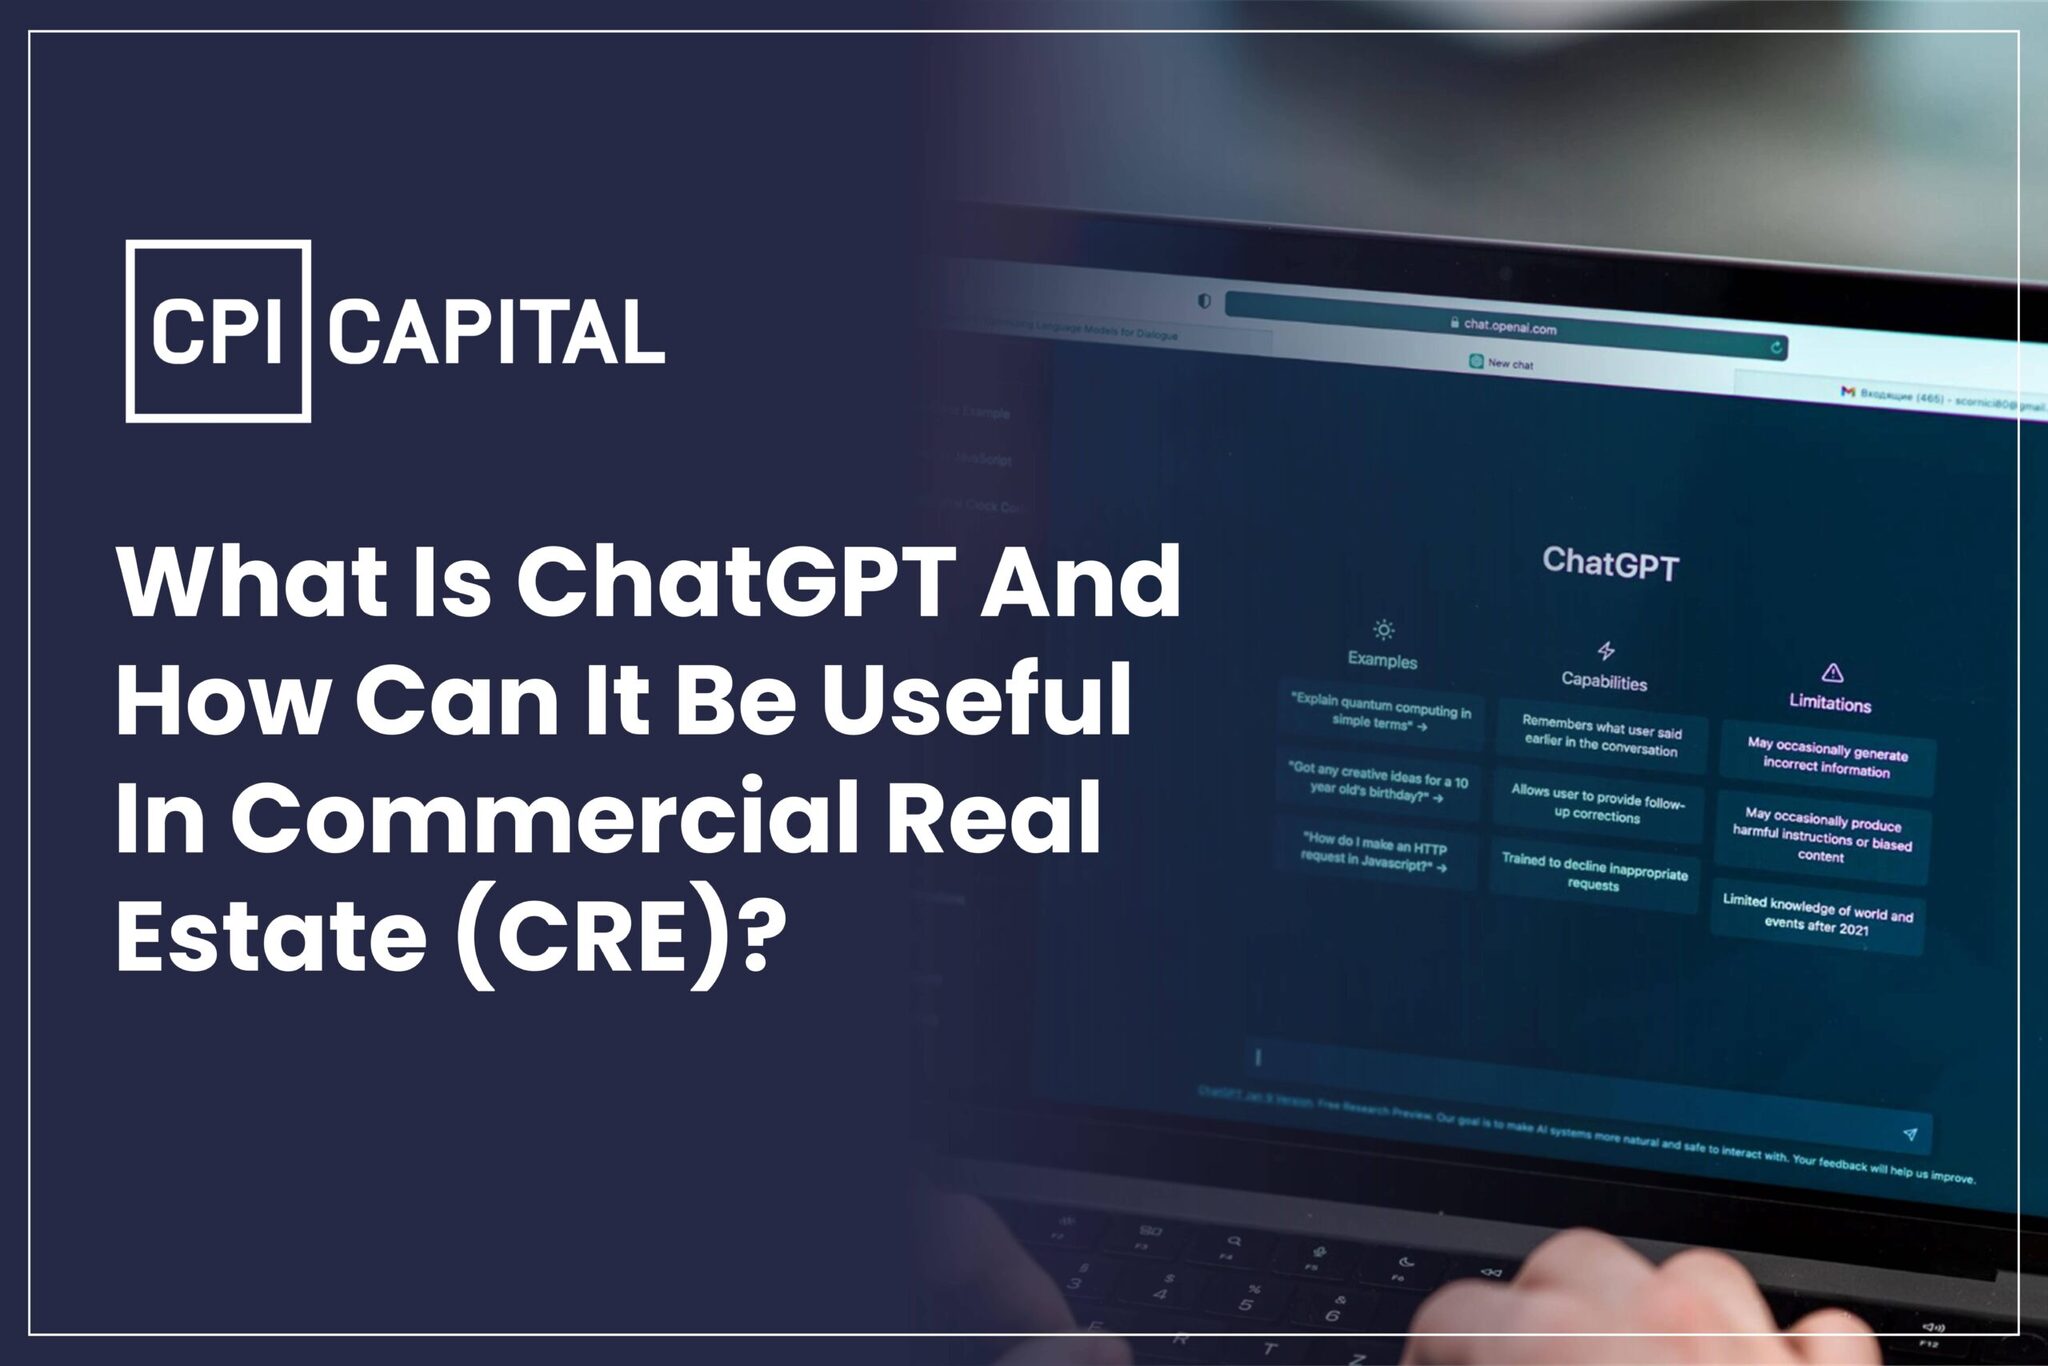 What is ChatGPT And How Can It Help With Commercial Real Estate (CRE)?